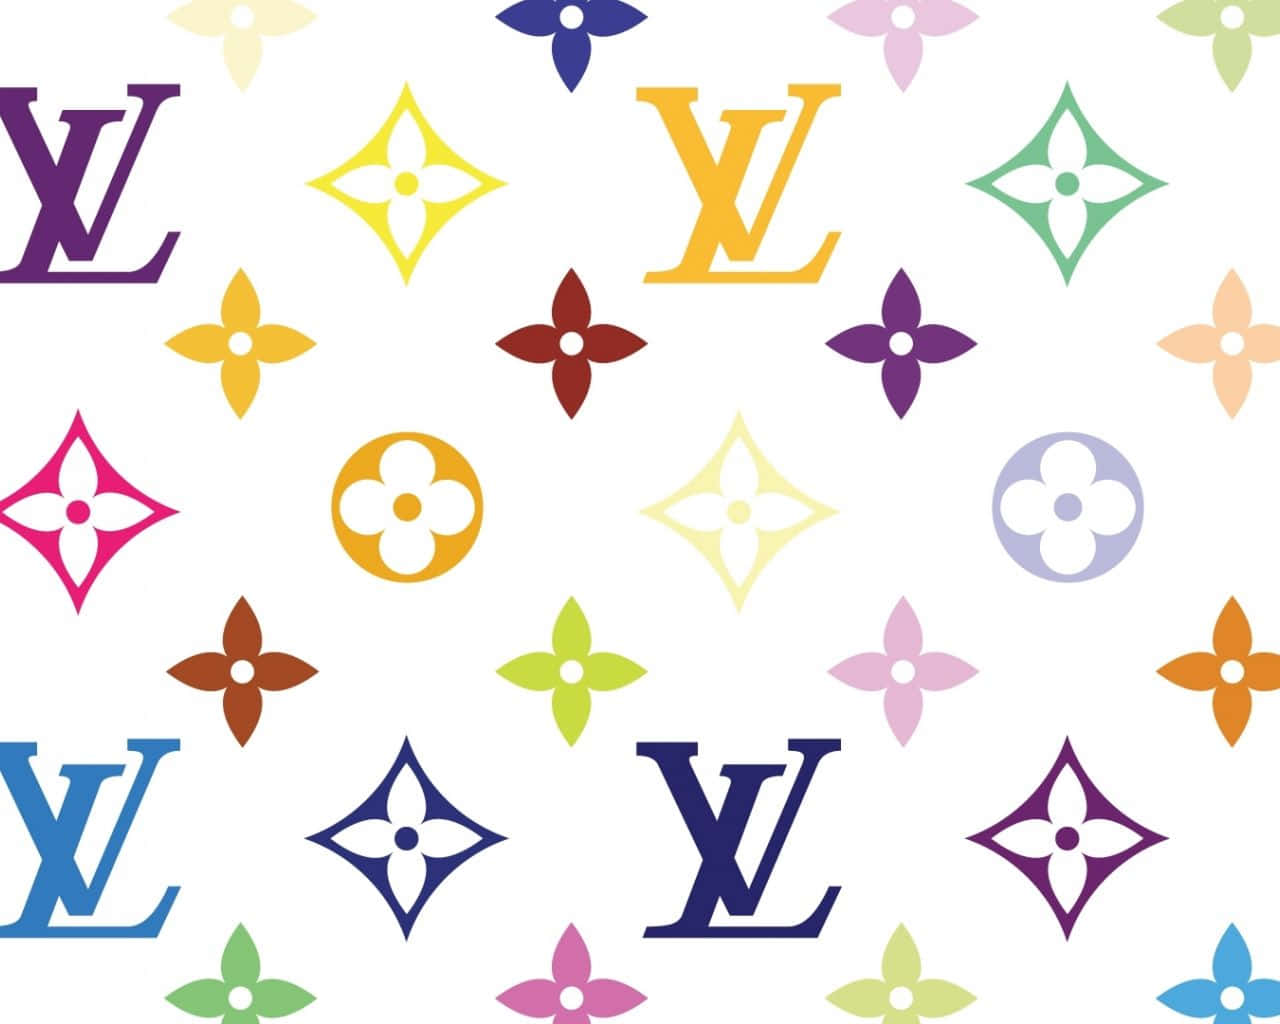 Download The luxurious Louis Vuitton monogram printed on a high-definition  4K background. Wallpaper